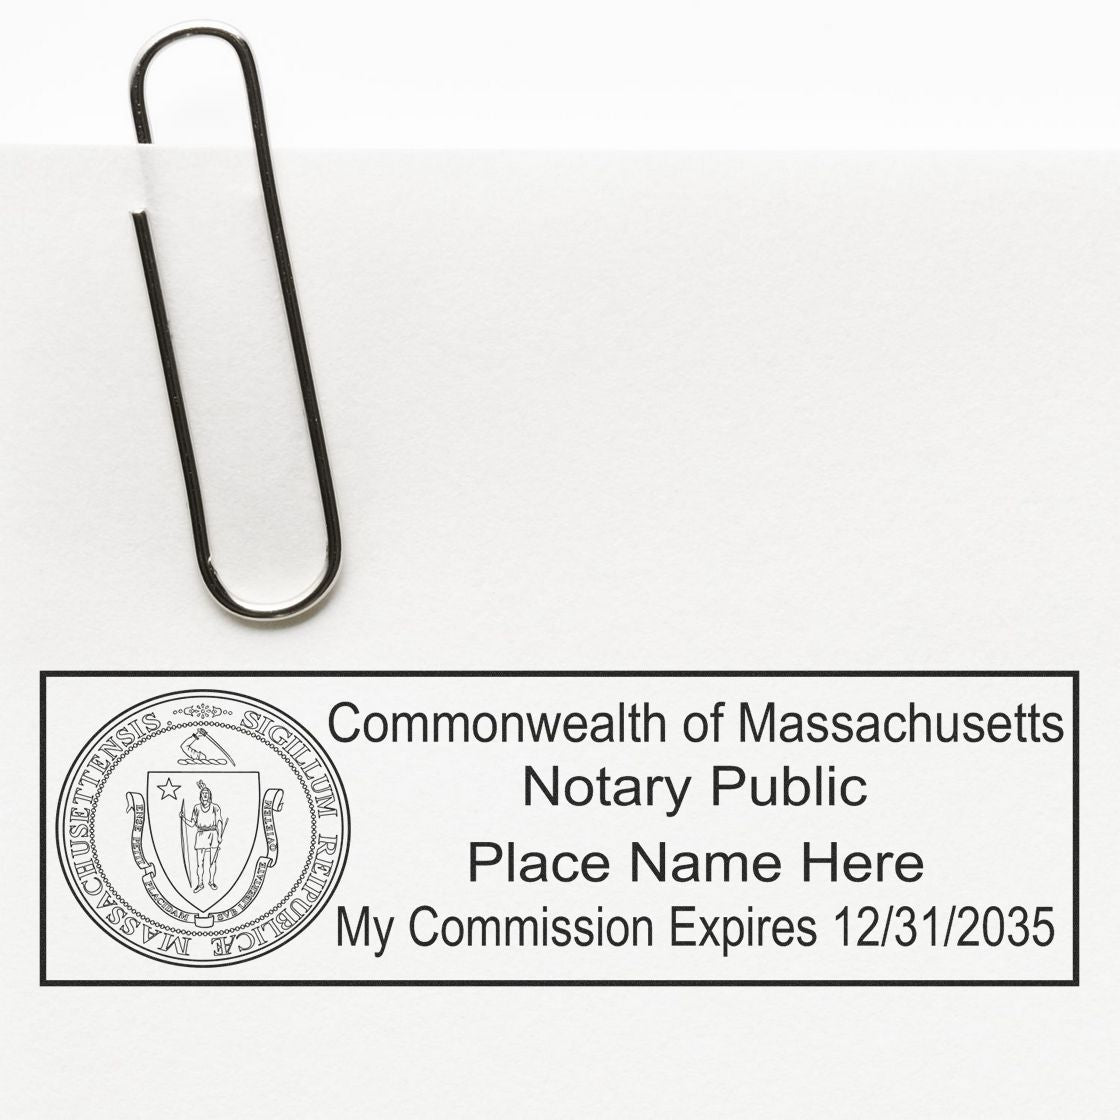 Another Example of a stamped impression of the Heavy-Duty Massachusetts Rectangular Notary Stamp on a piece of office paper.